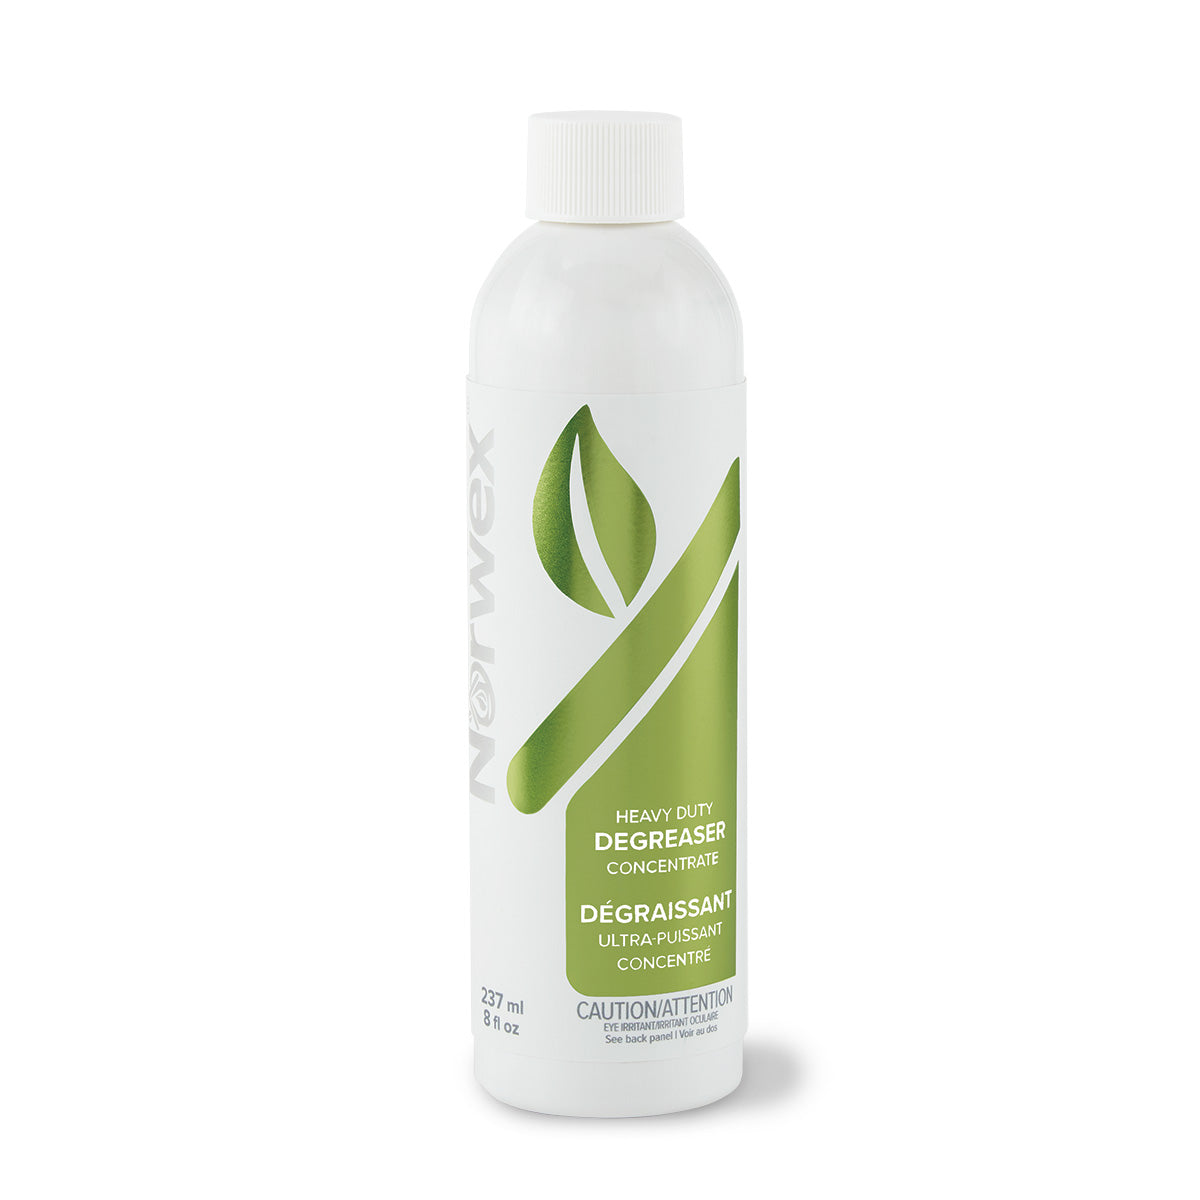 Norwex Heavy Duty Degreaser Concentrate